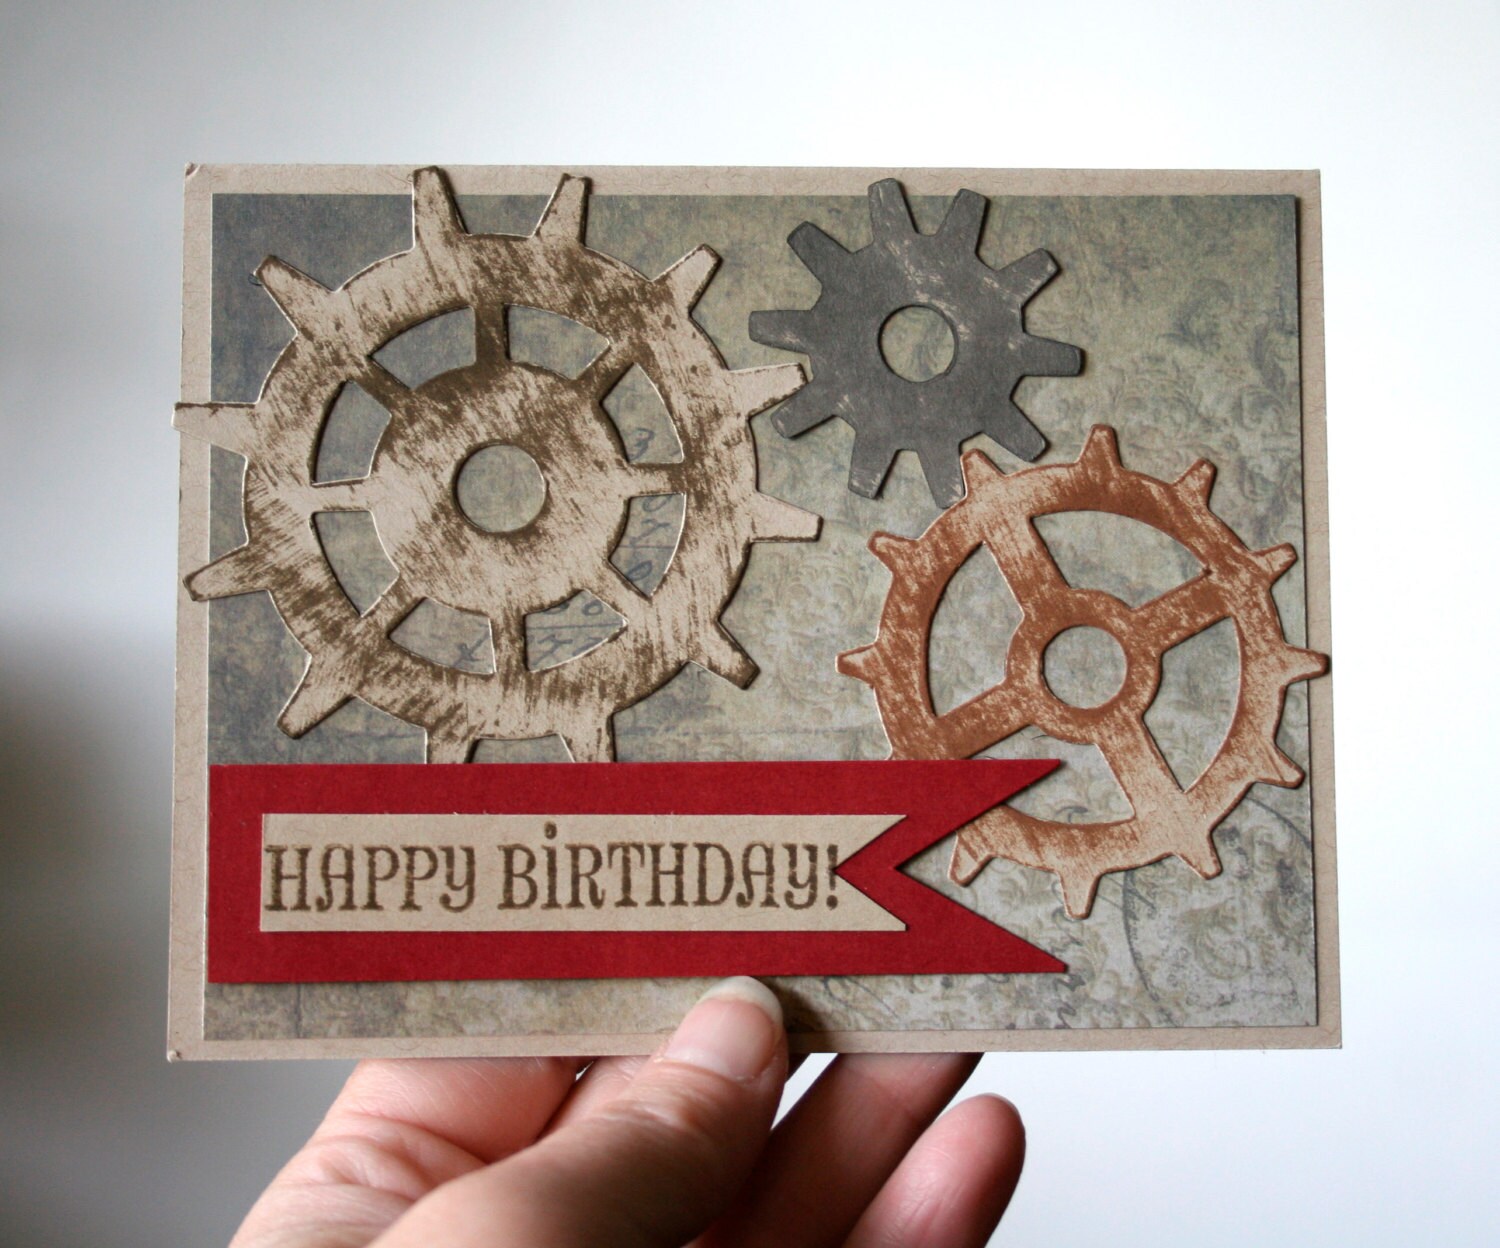 Happy Birthday Steampunk cogs and gears handmade by Vandicrafts